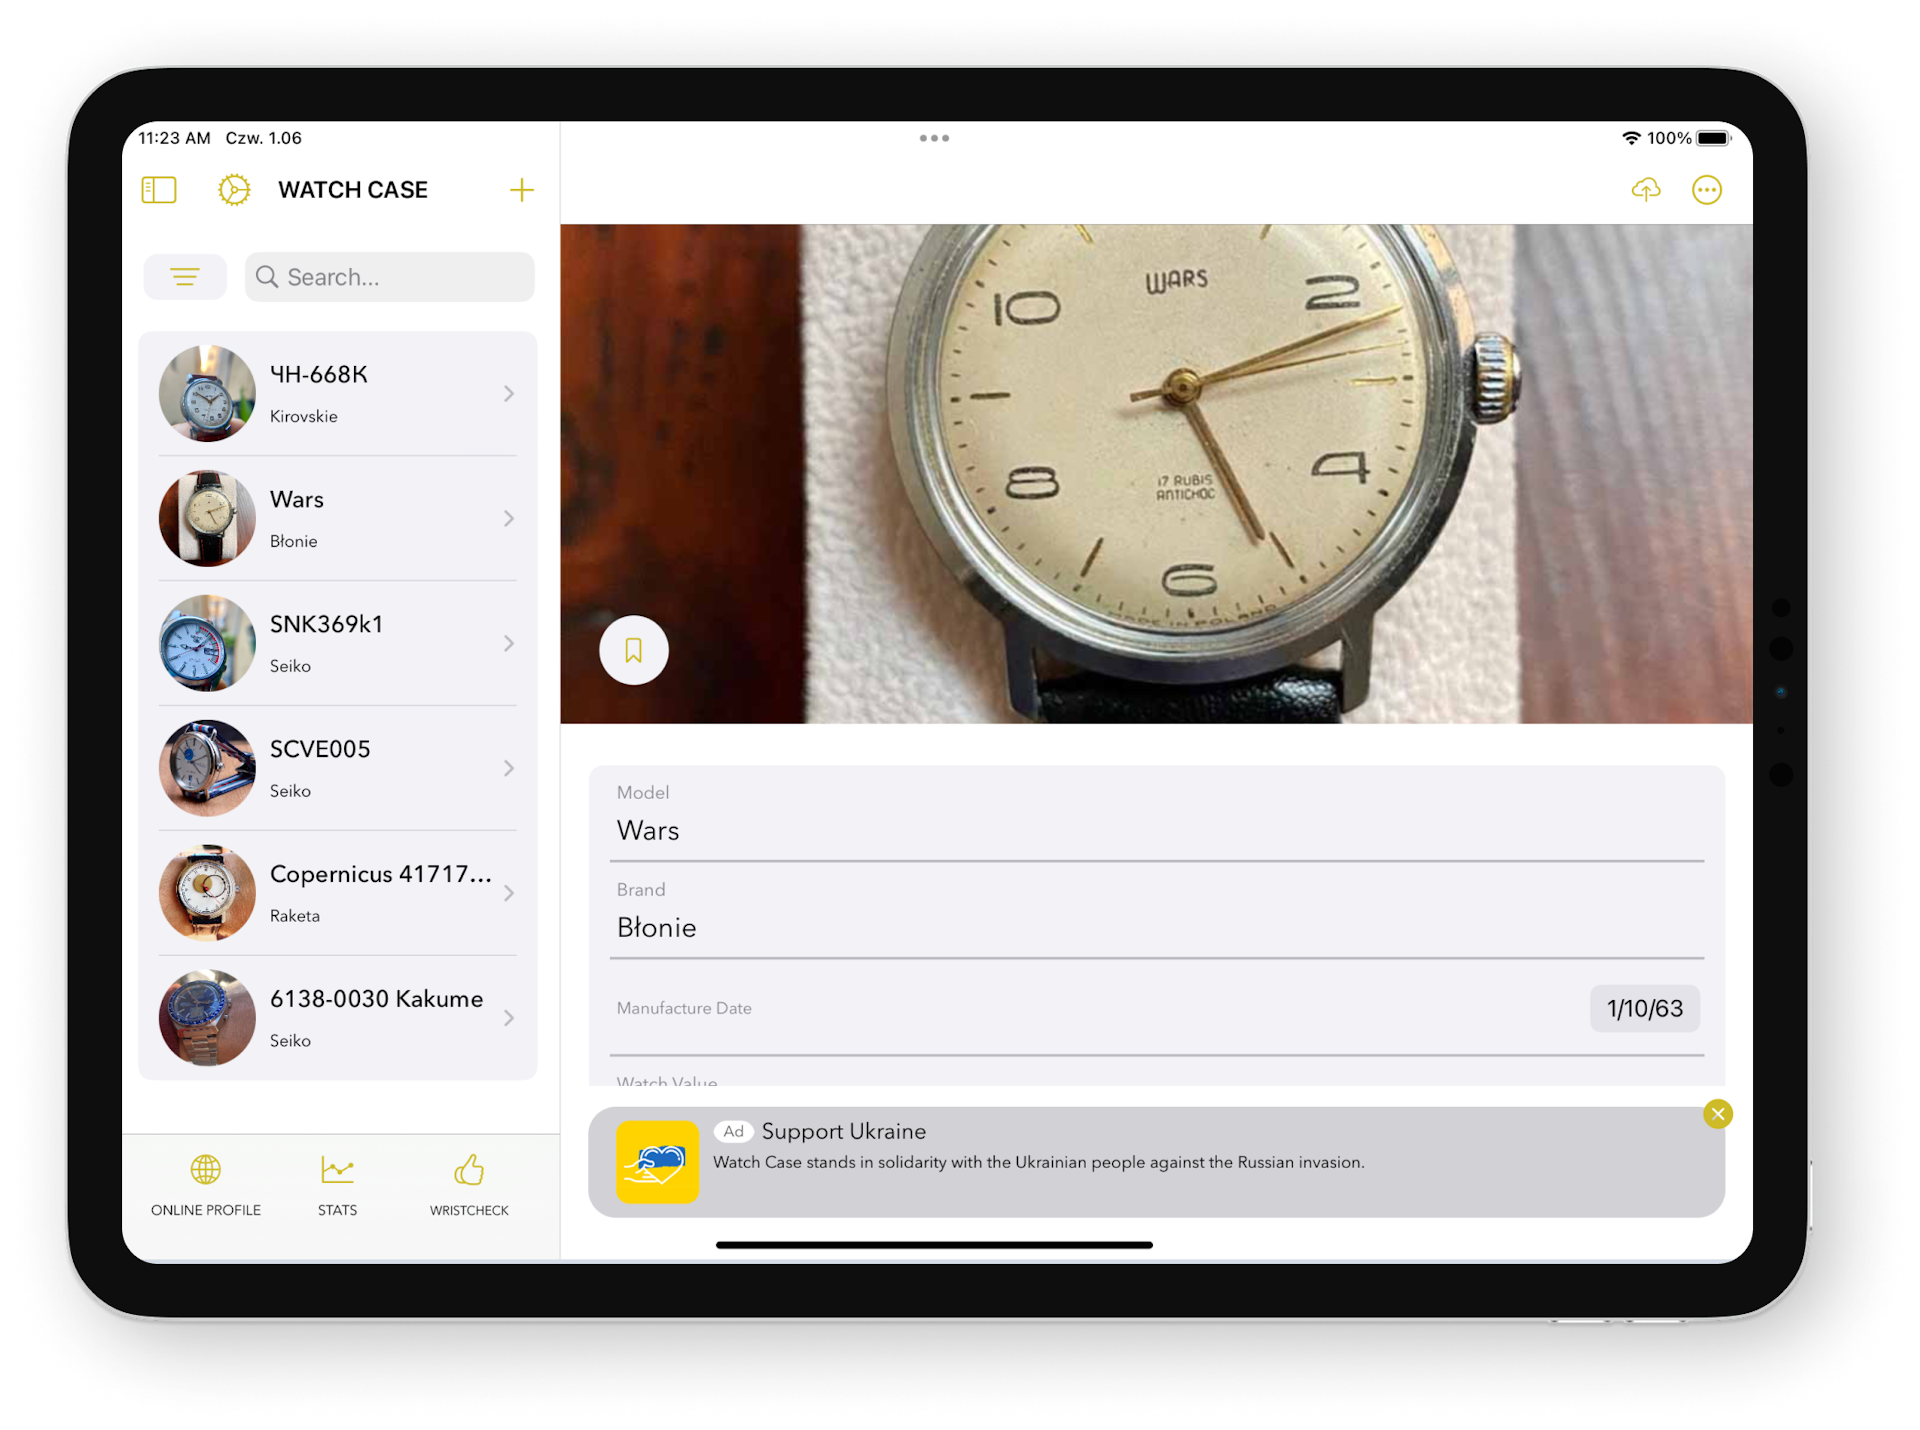 The Watch Case App, showing options to set up your blog